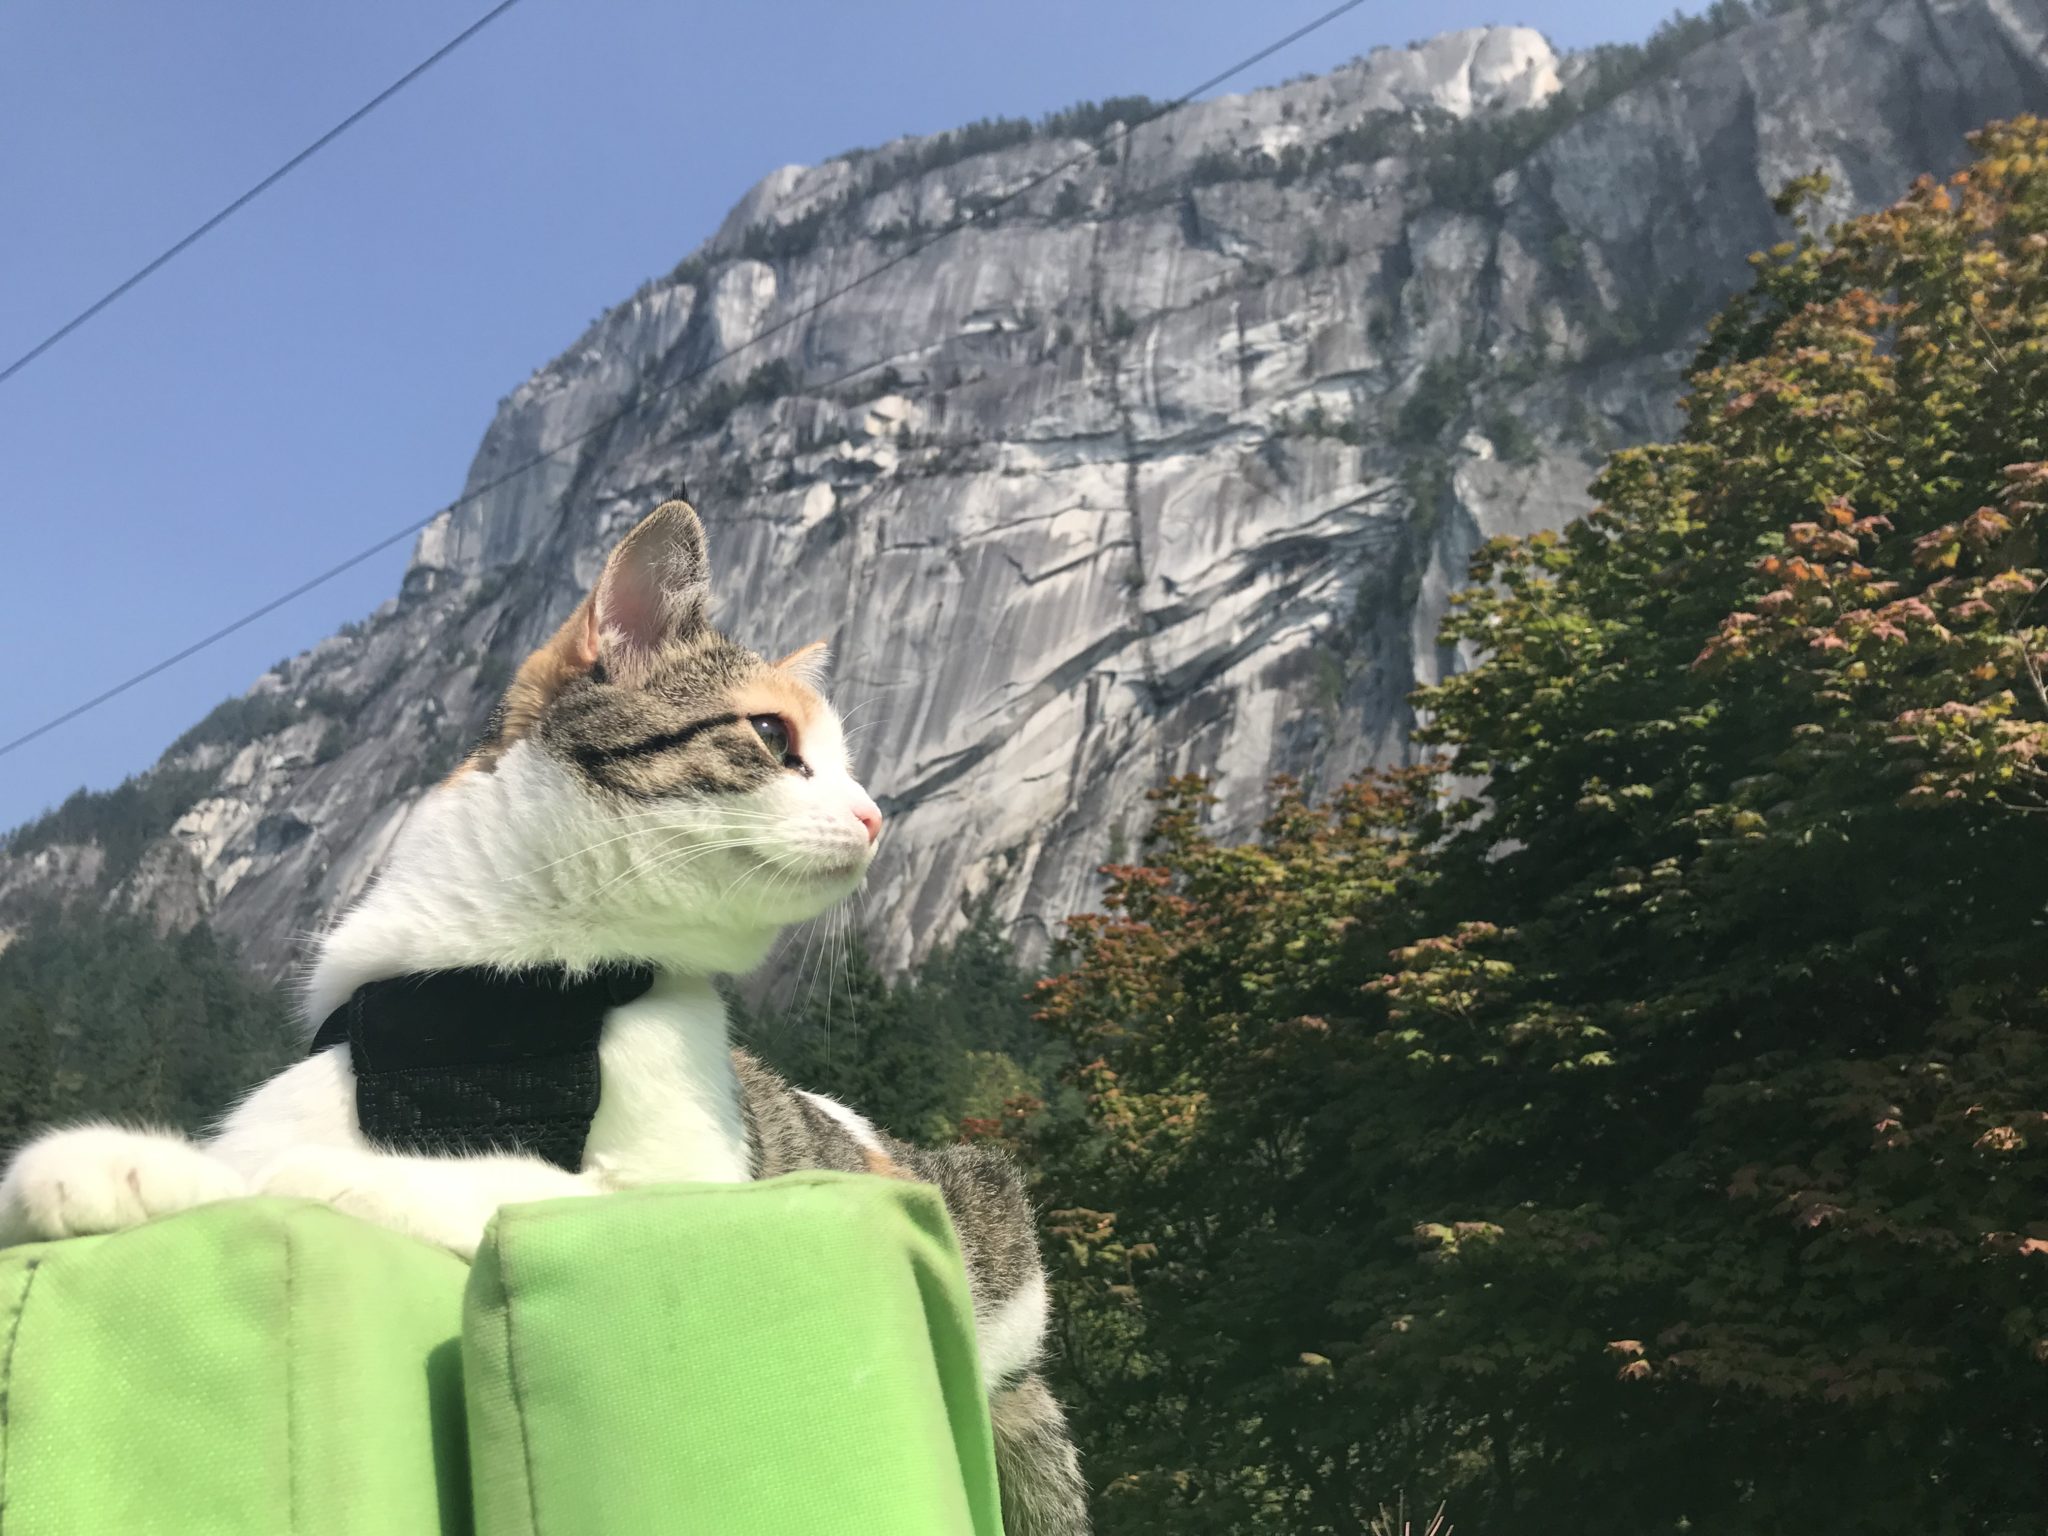 Cali is right at home in the meowntains.